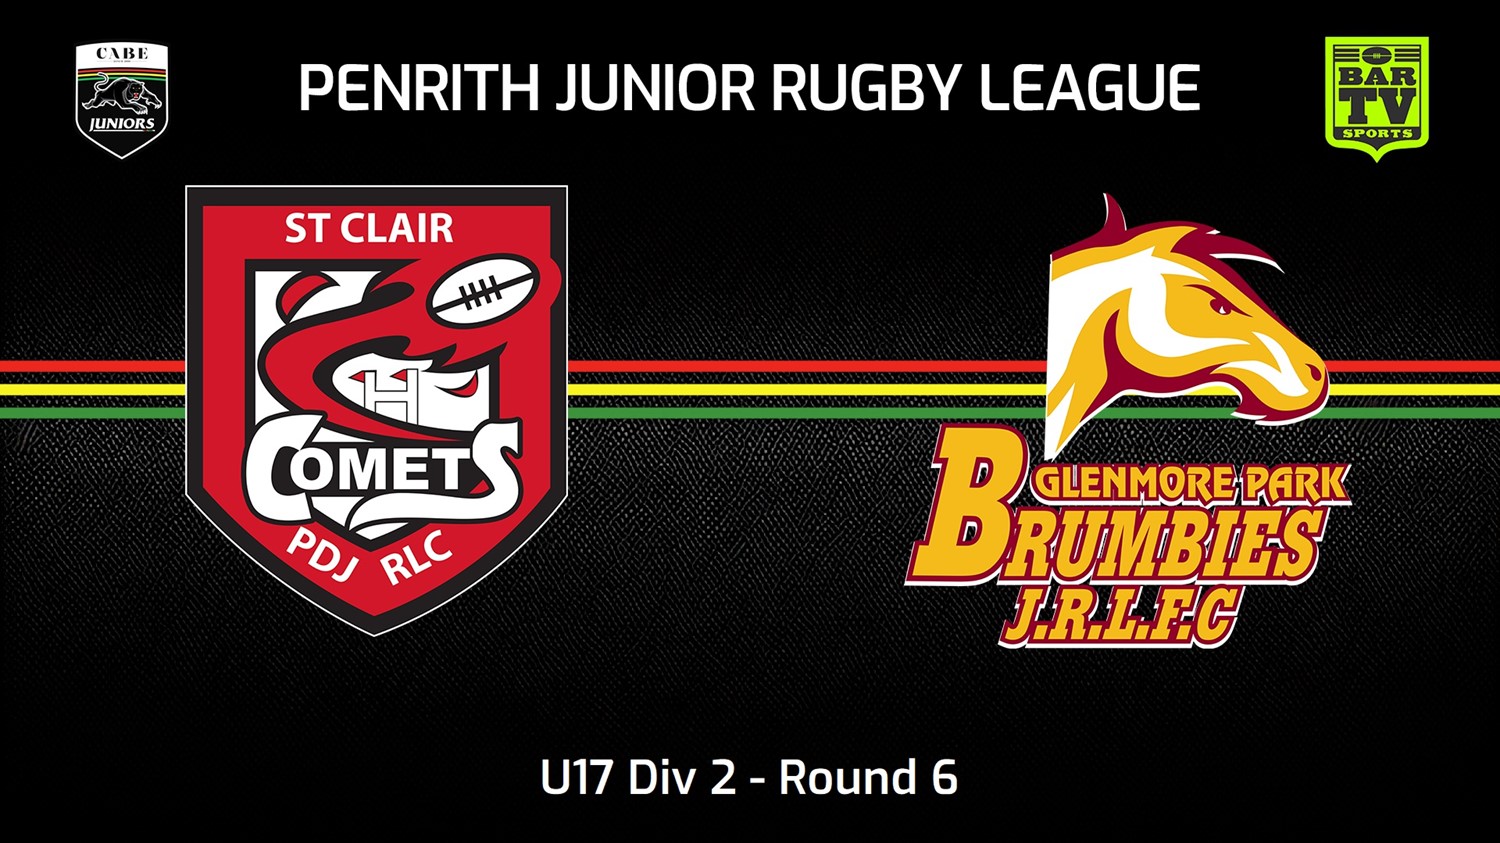 240519-video-Penrith & District Junior Rugby League Round 6 - U17 Div 2 - St Clair v Glenmore Park Brumbies Slate Image